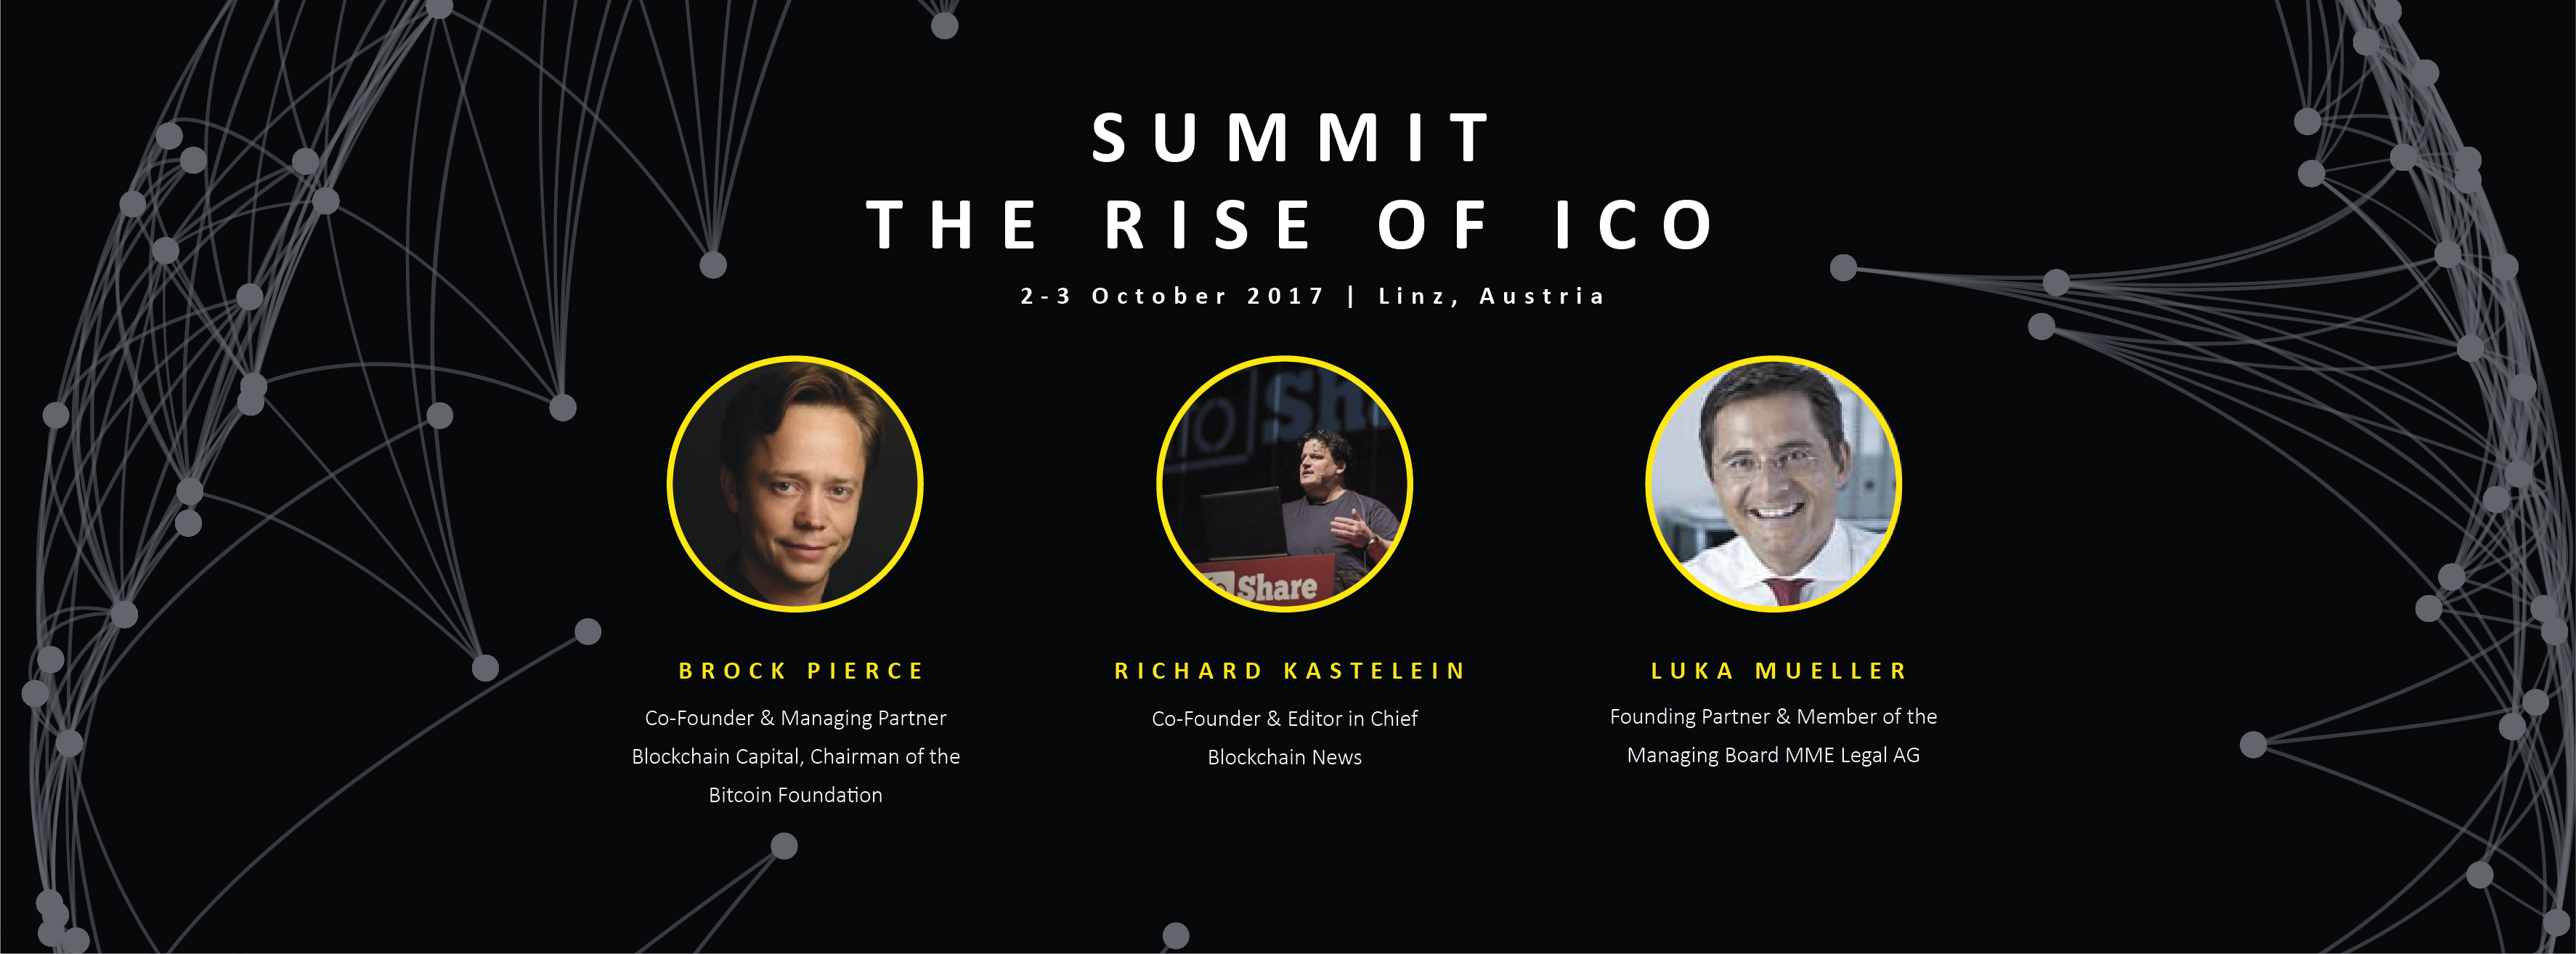 SUMMIT THE RISE OF ICO